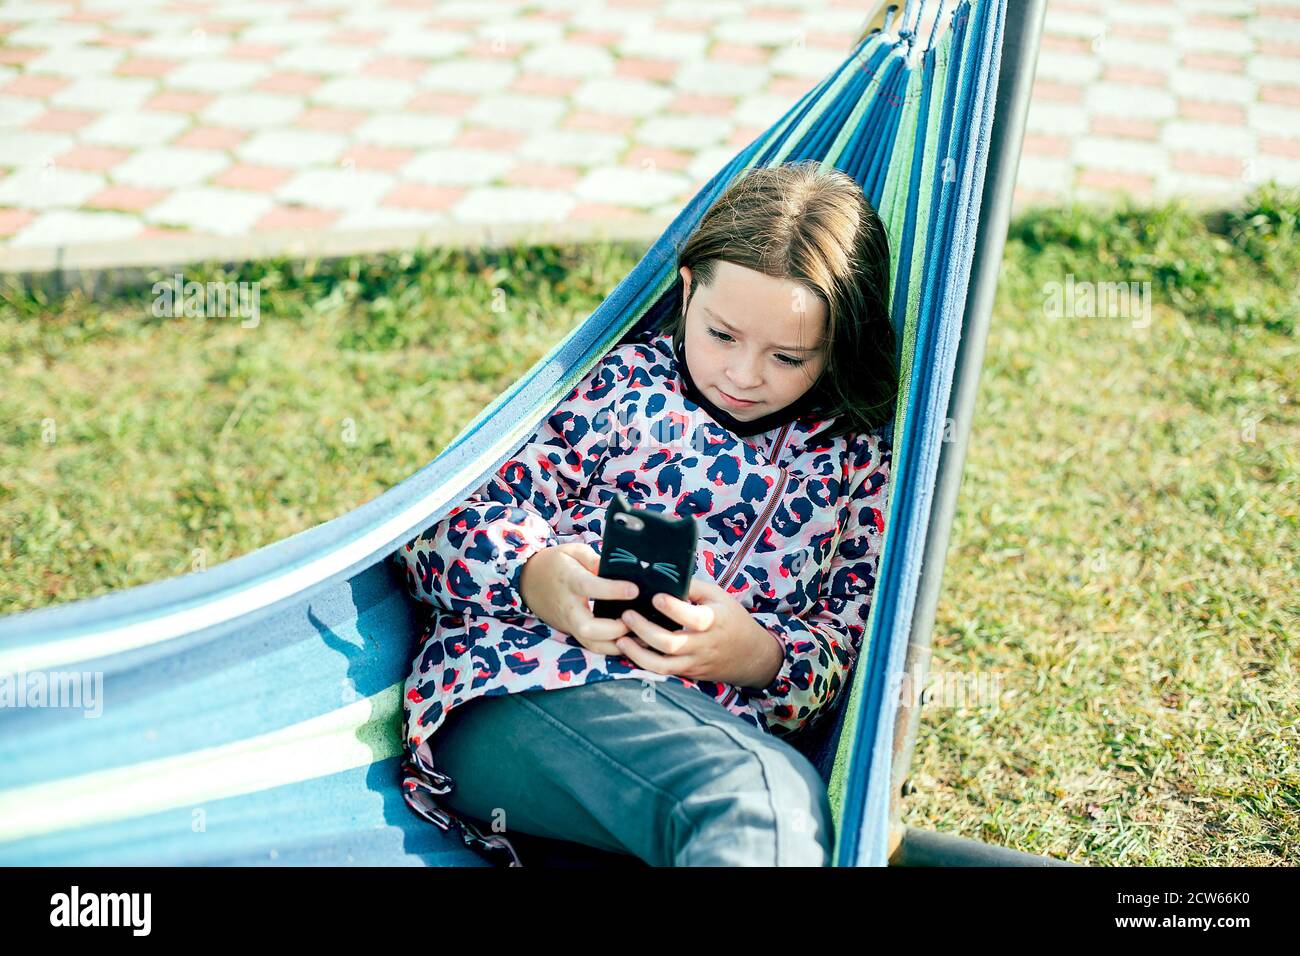 Cute caucasian girl 7-8 years old lies on hammock and using her phone on a sunny day. Stock Photo